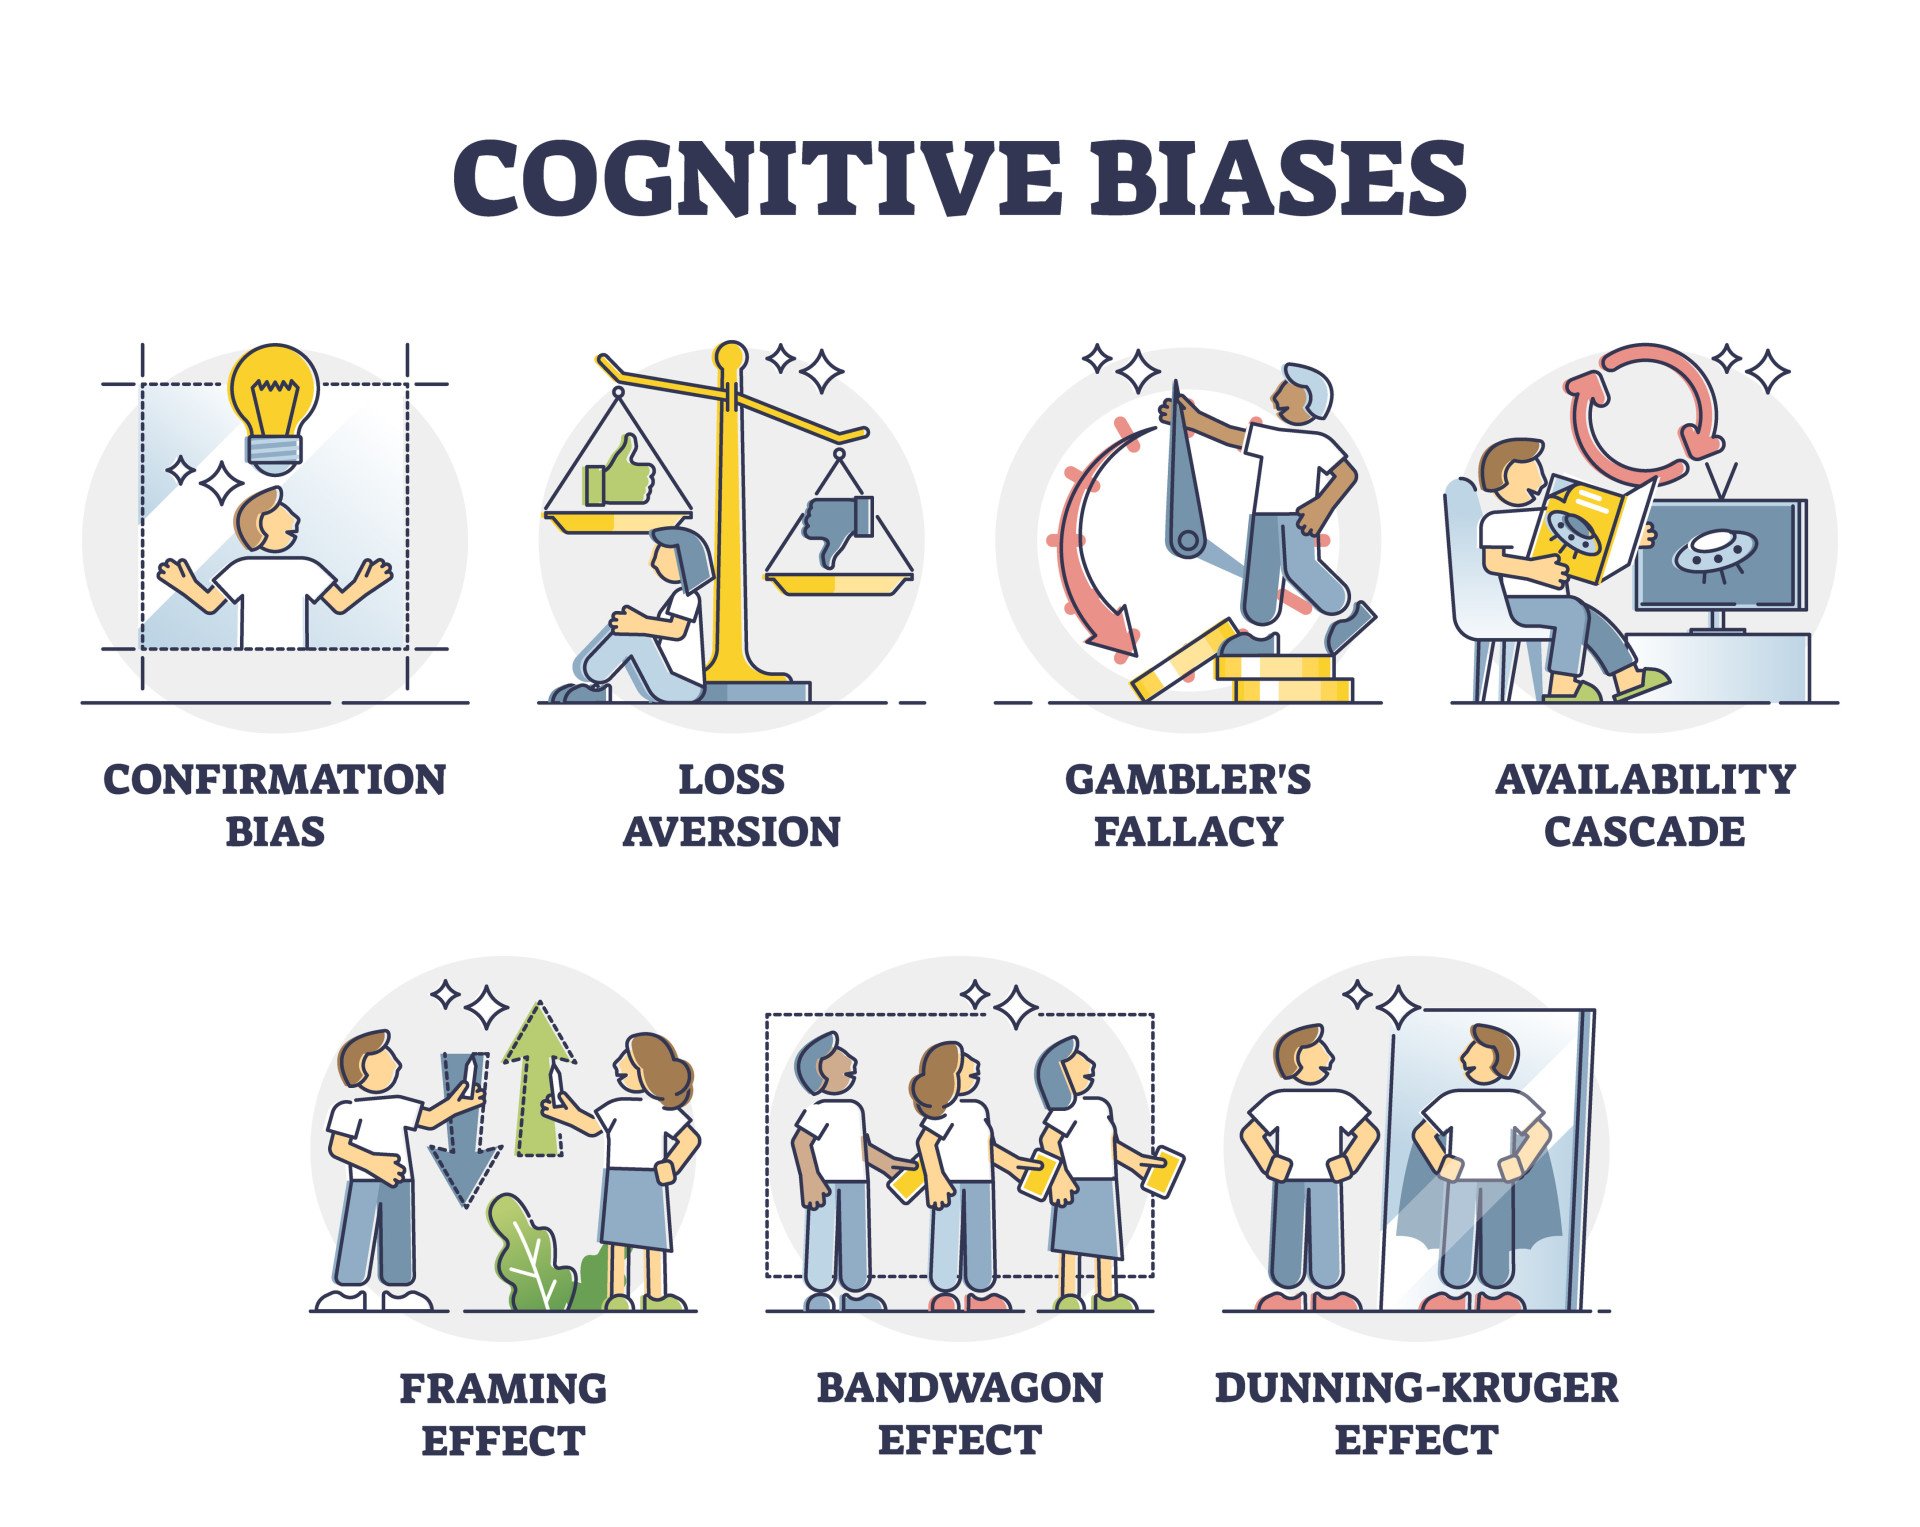 Cognitive biases as systematic error in thinking and behavior outline diagram. Psychological mindset feeling with non logic judgment effects vector illustration. 